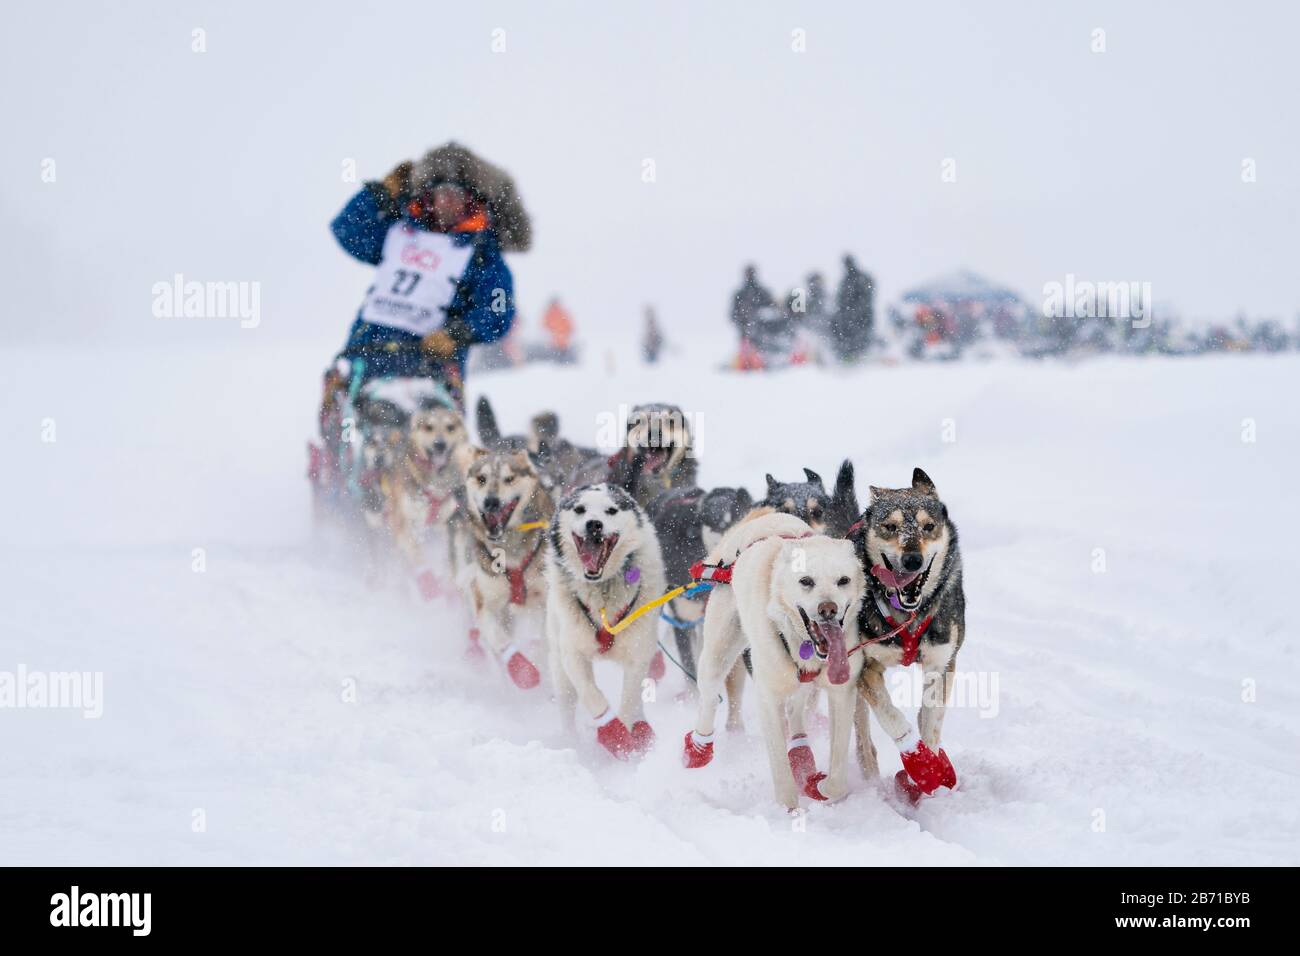 Musher Mitch Seavey competing in the 48th Iditarod Trail Sled Dog Race in Southcentral Alaska. Stock Photo